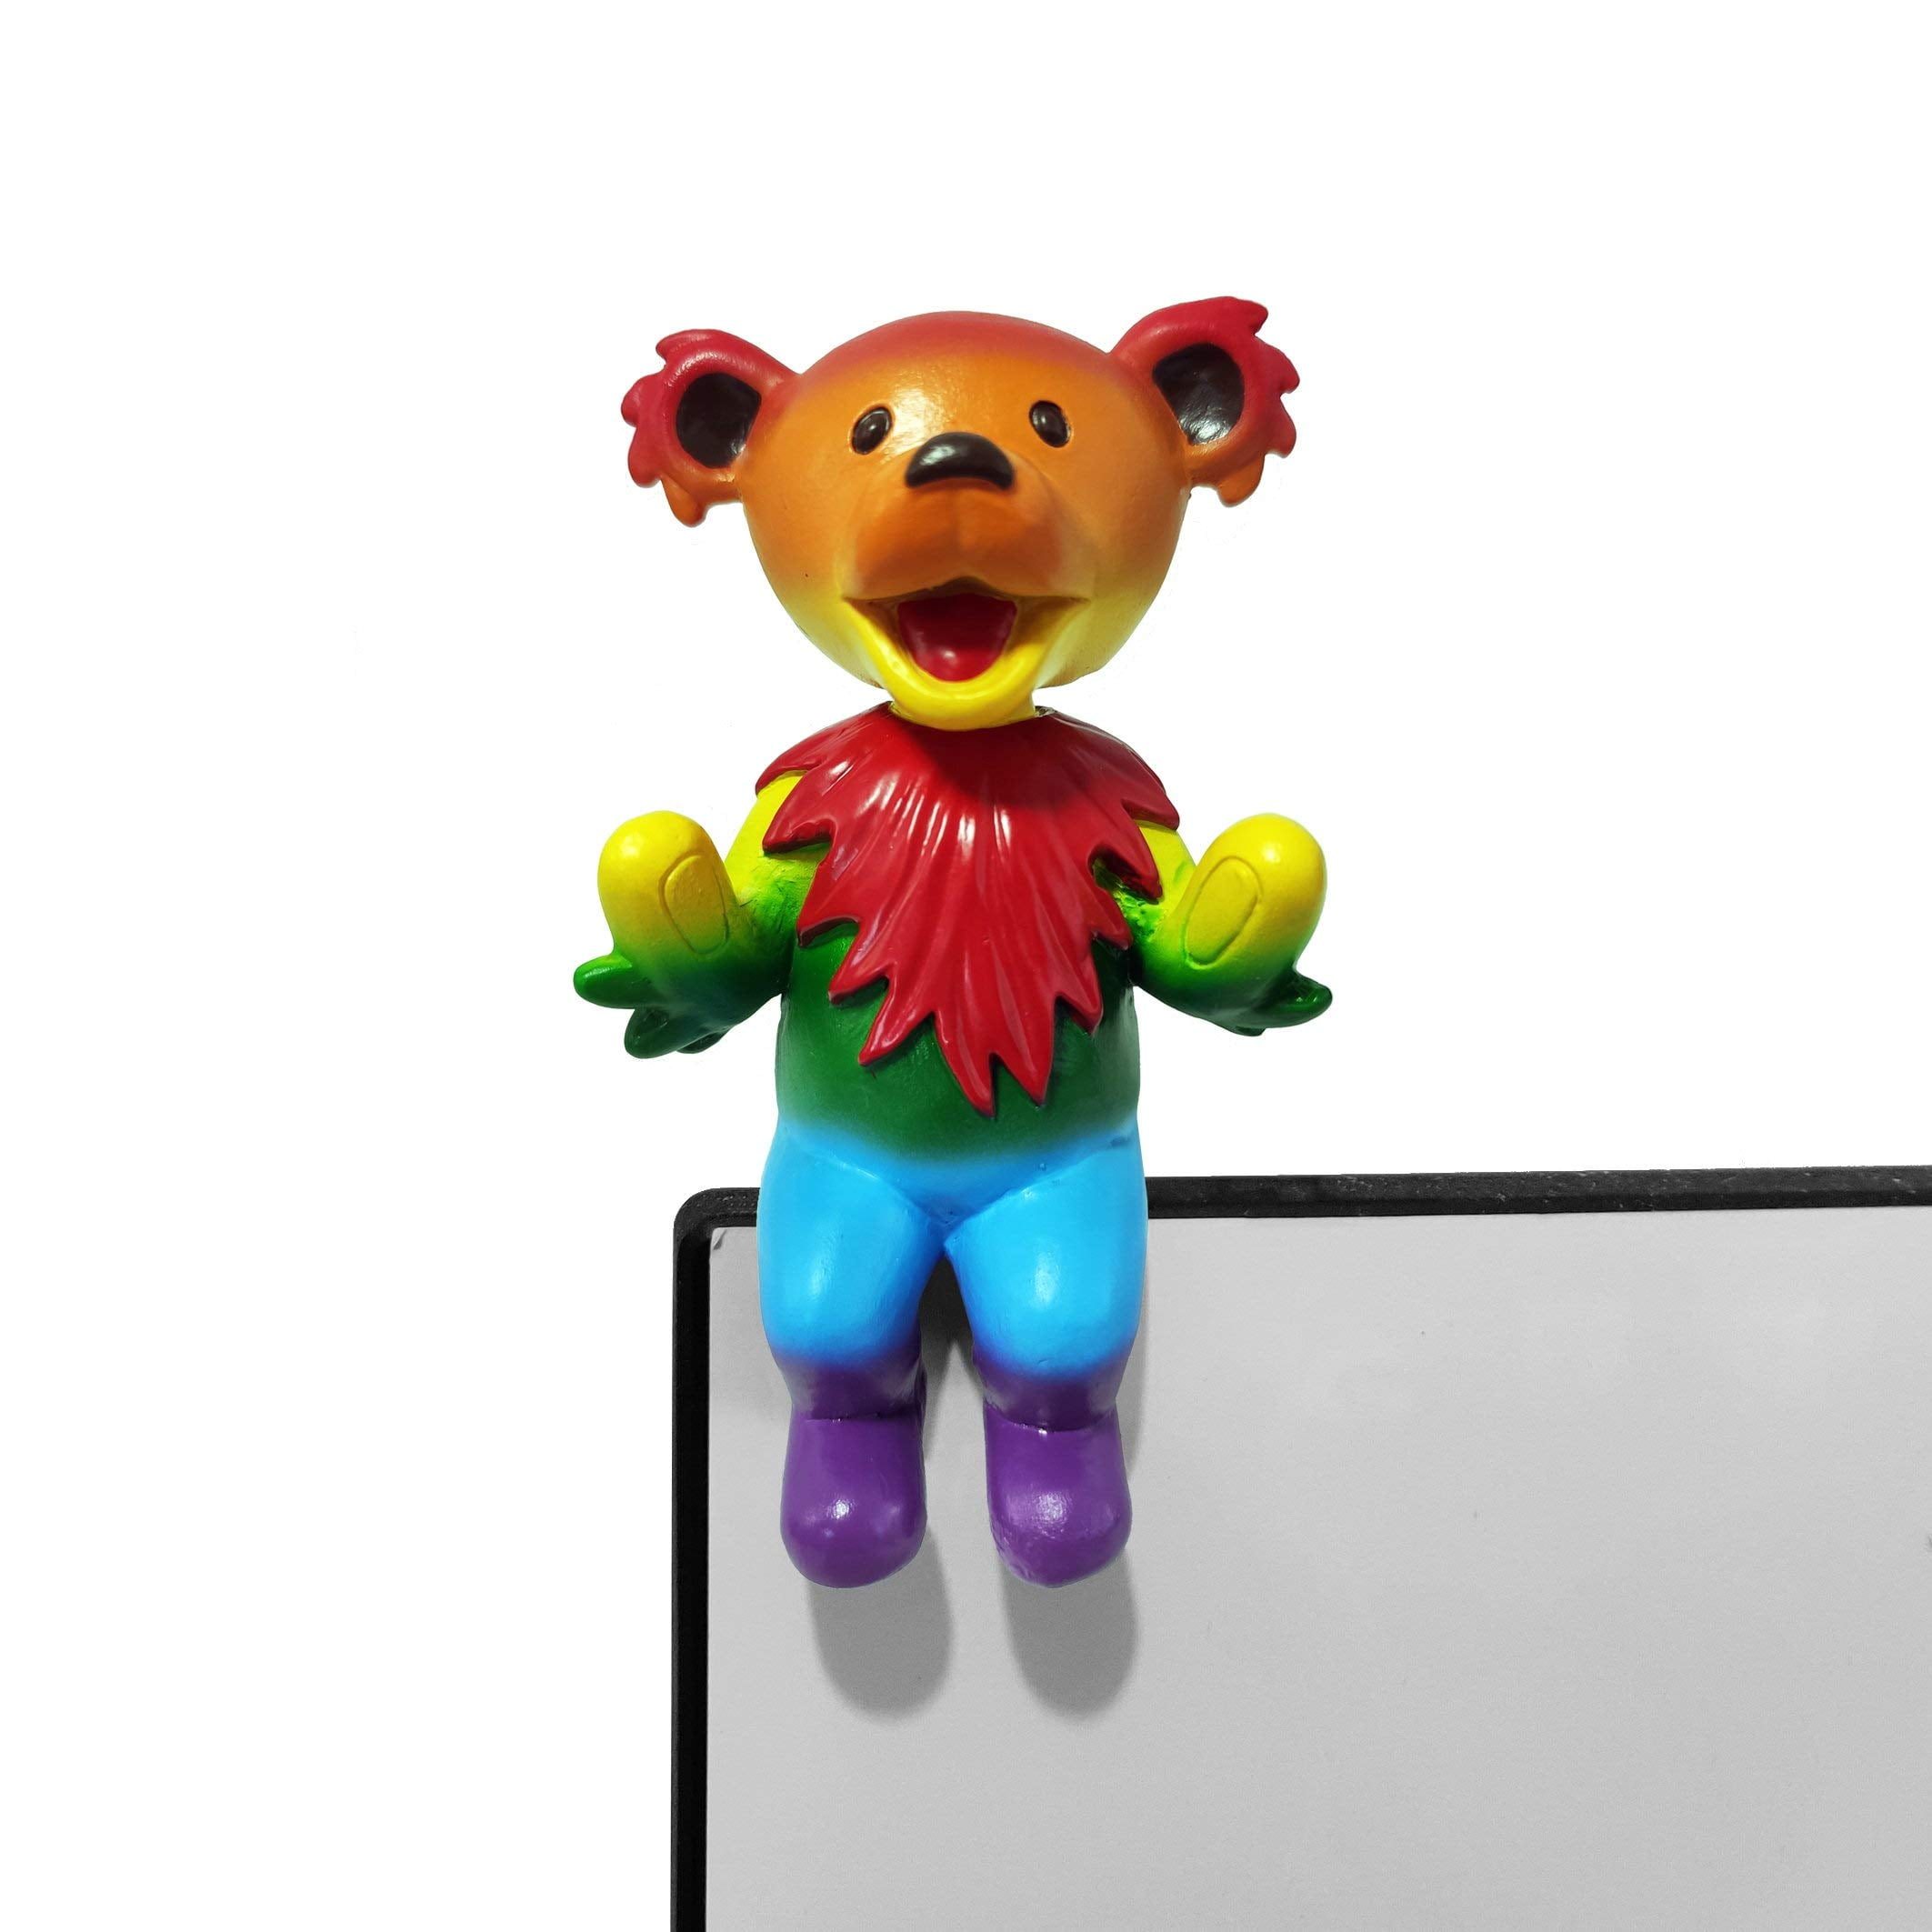 Bobblehead Kollectico Grateful Dead Holidays Four pack 